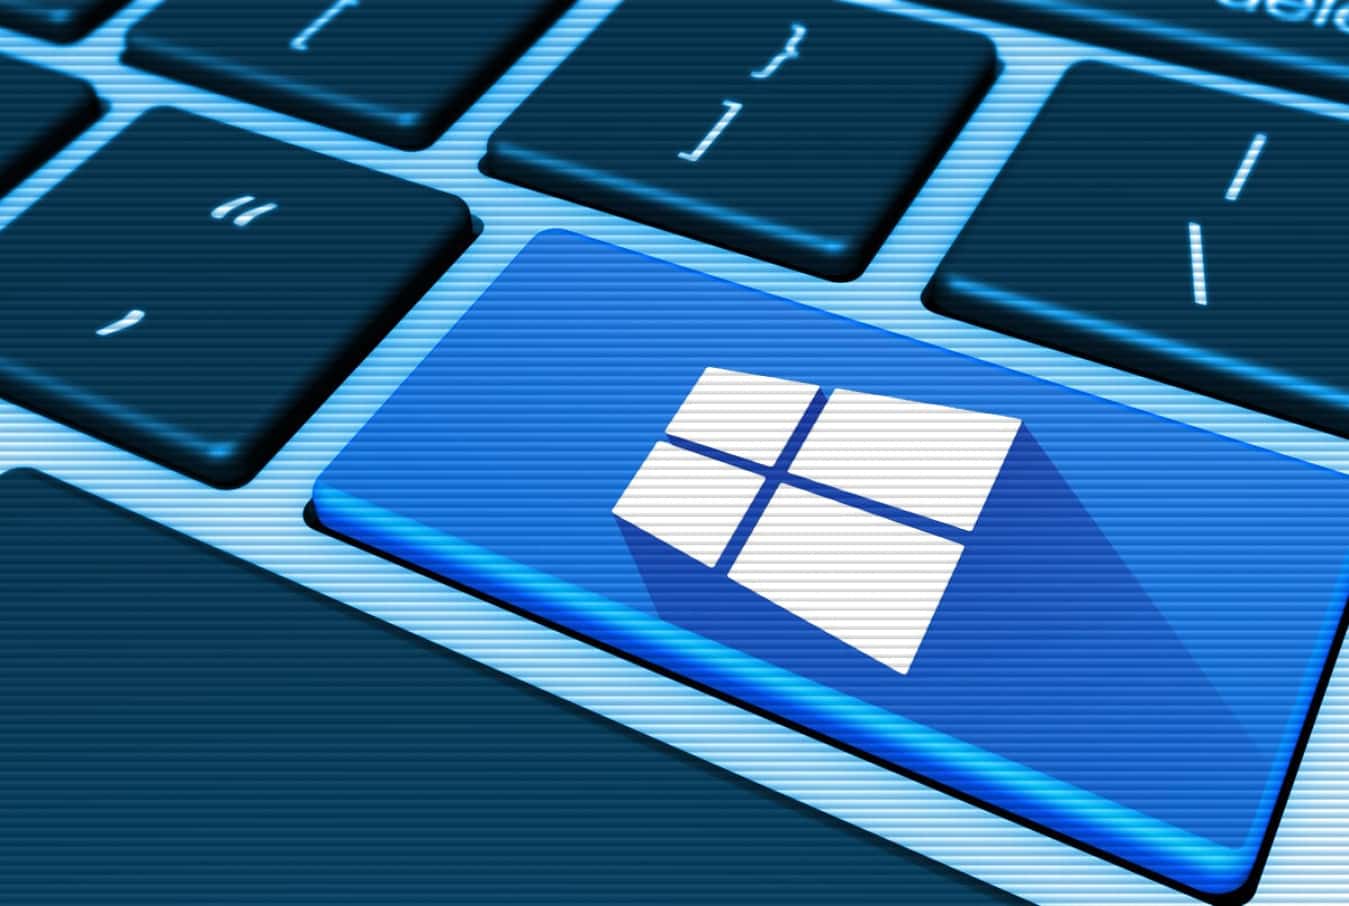 Microsoft hopes Windows PCs protection with Pluton security chip